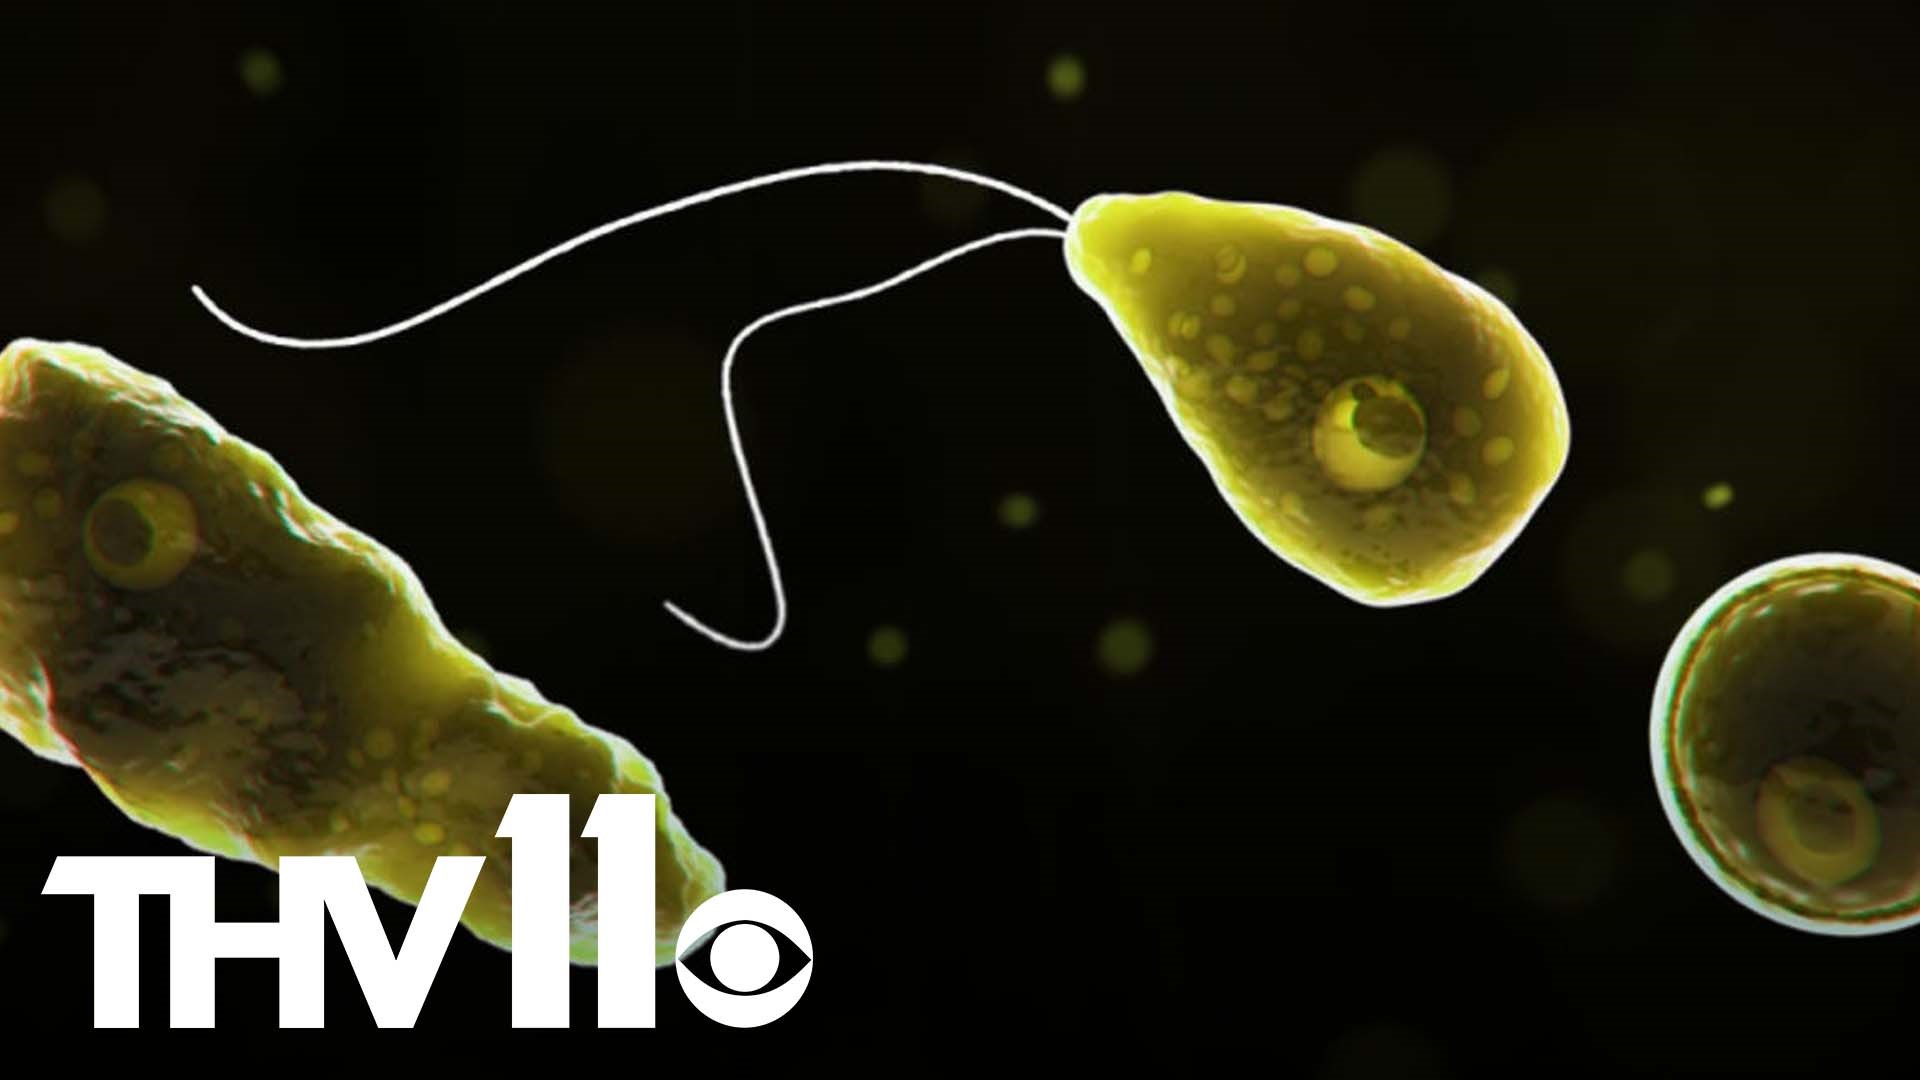 The Arkansas Department on Health announced that a person has died from a rare infection which targets the brain tissue commonly known as a brain-eating amoeba.